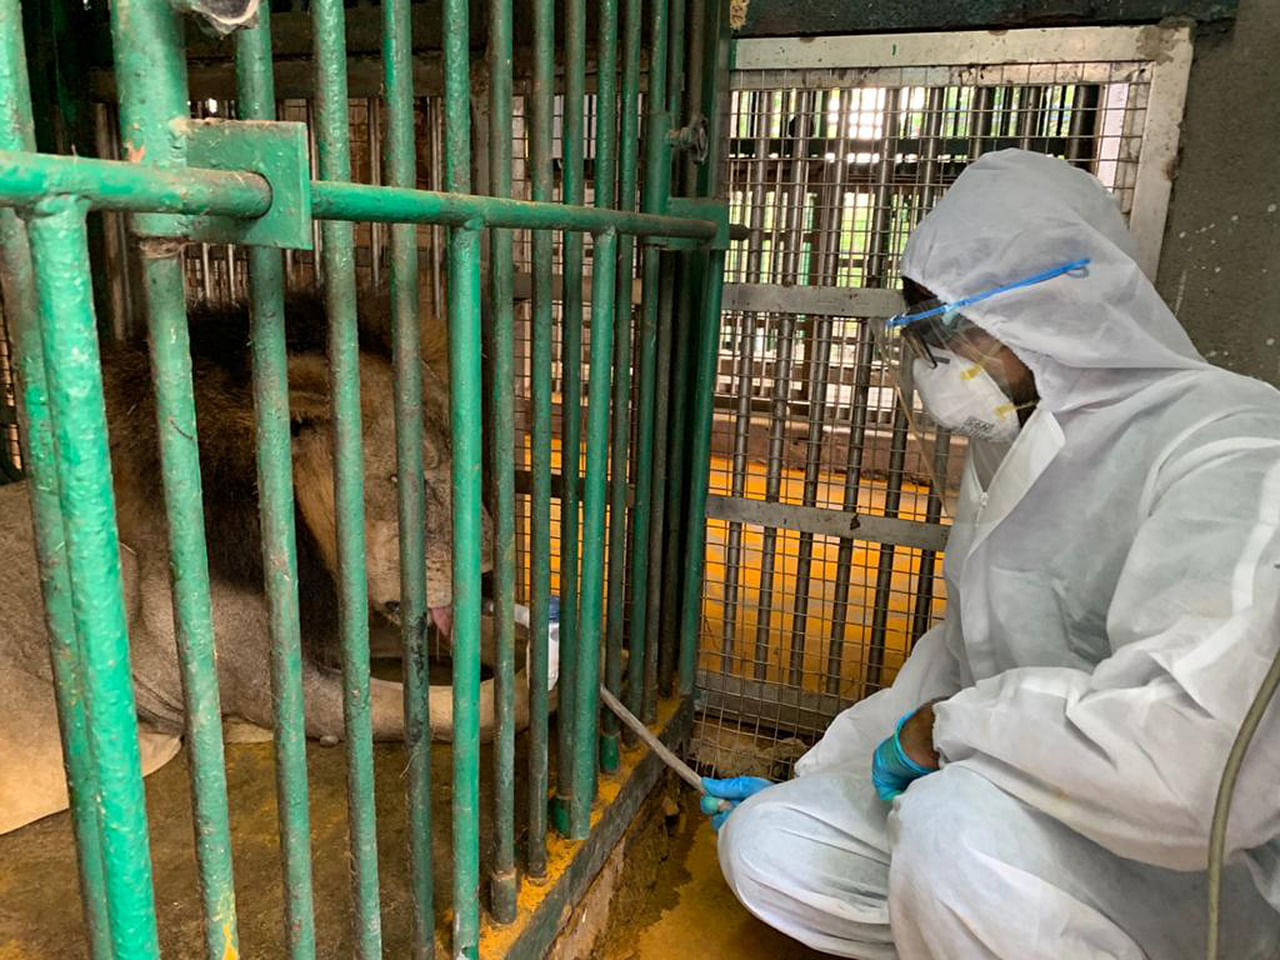 Zoo In Chennai Loses Two Lions To Covid 19 But Nurses 13 Others Back To Health South Asia News Top Stories The Straits Times